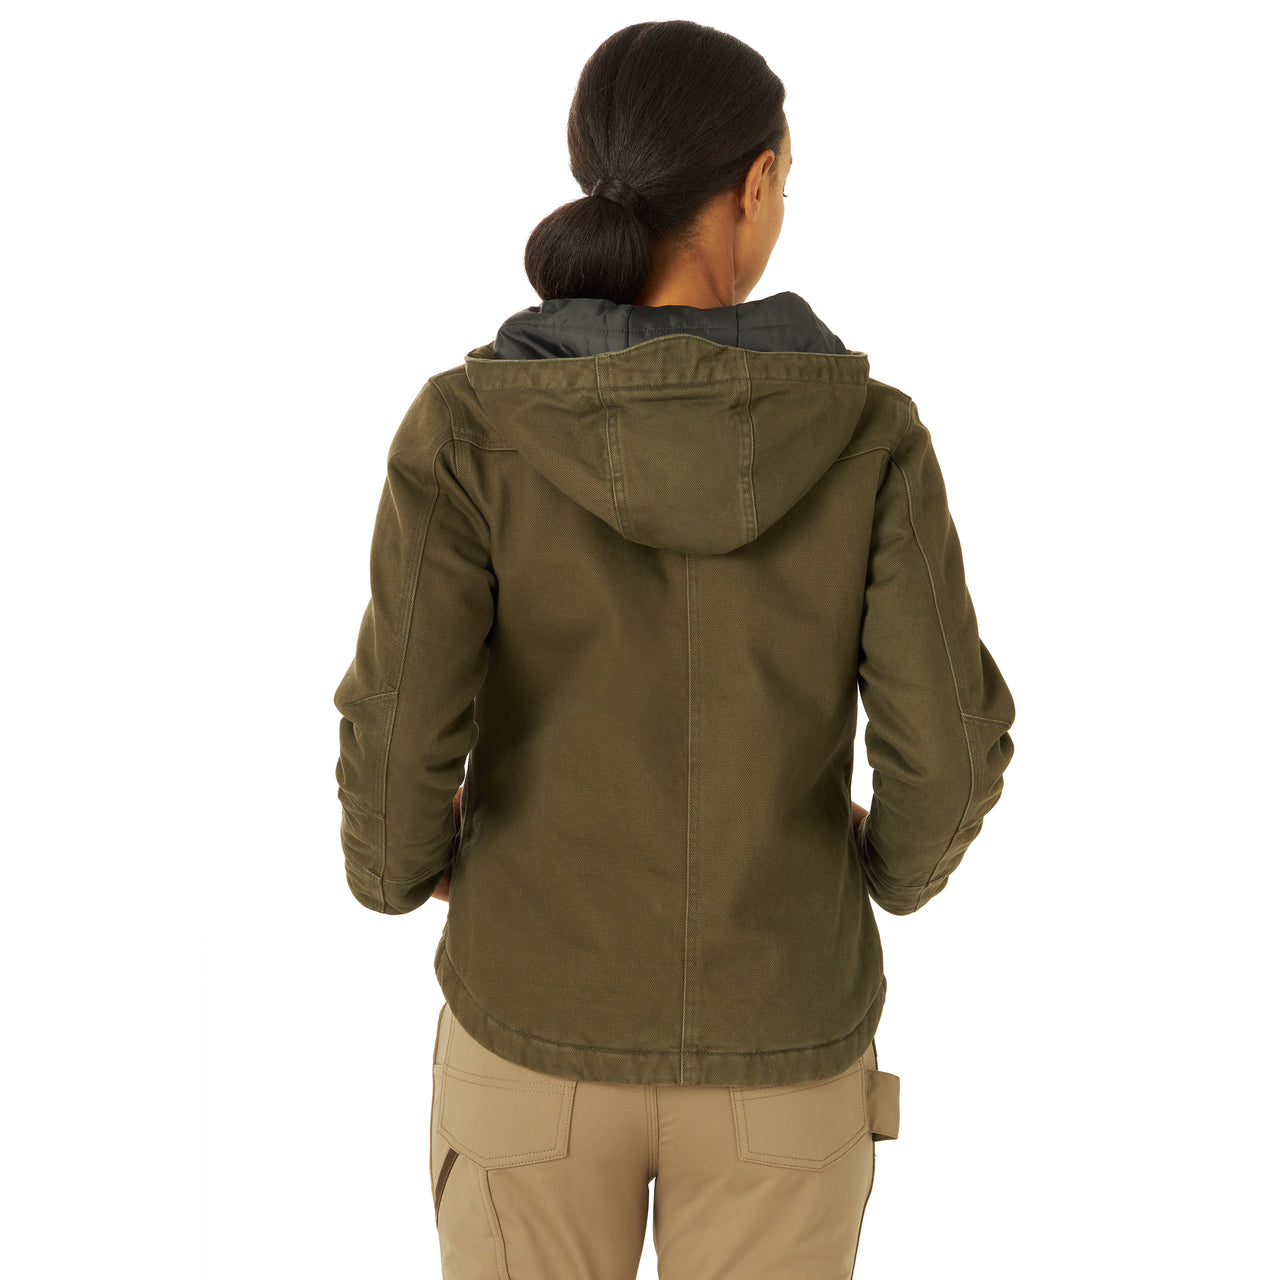 Wrangler Riggs Womens Canvas Work Jacket - Olive Green